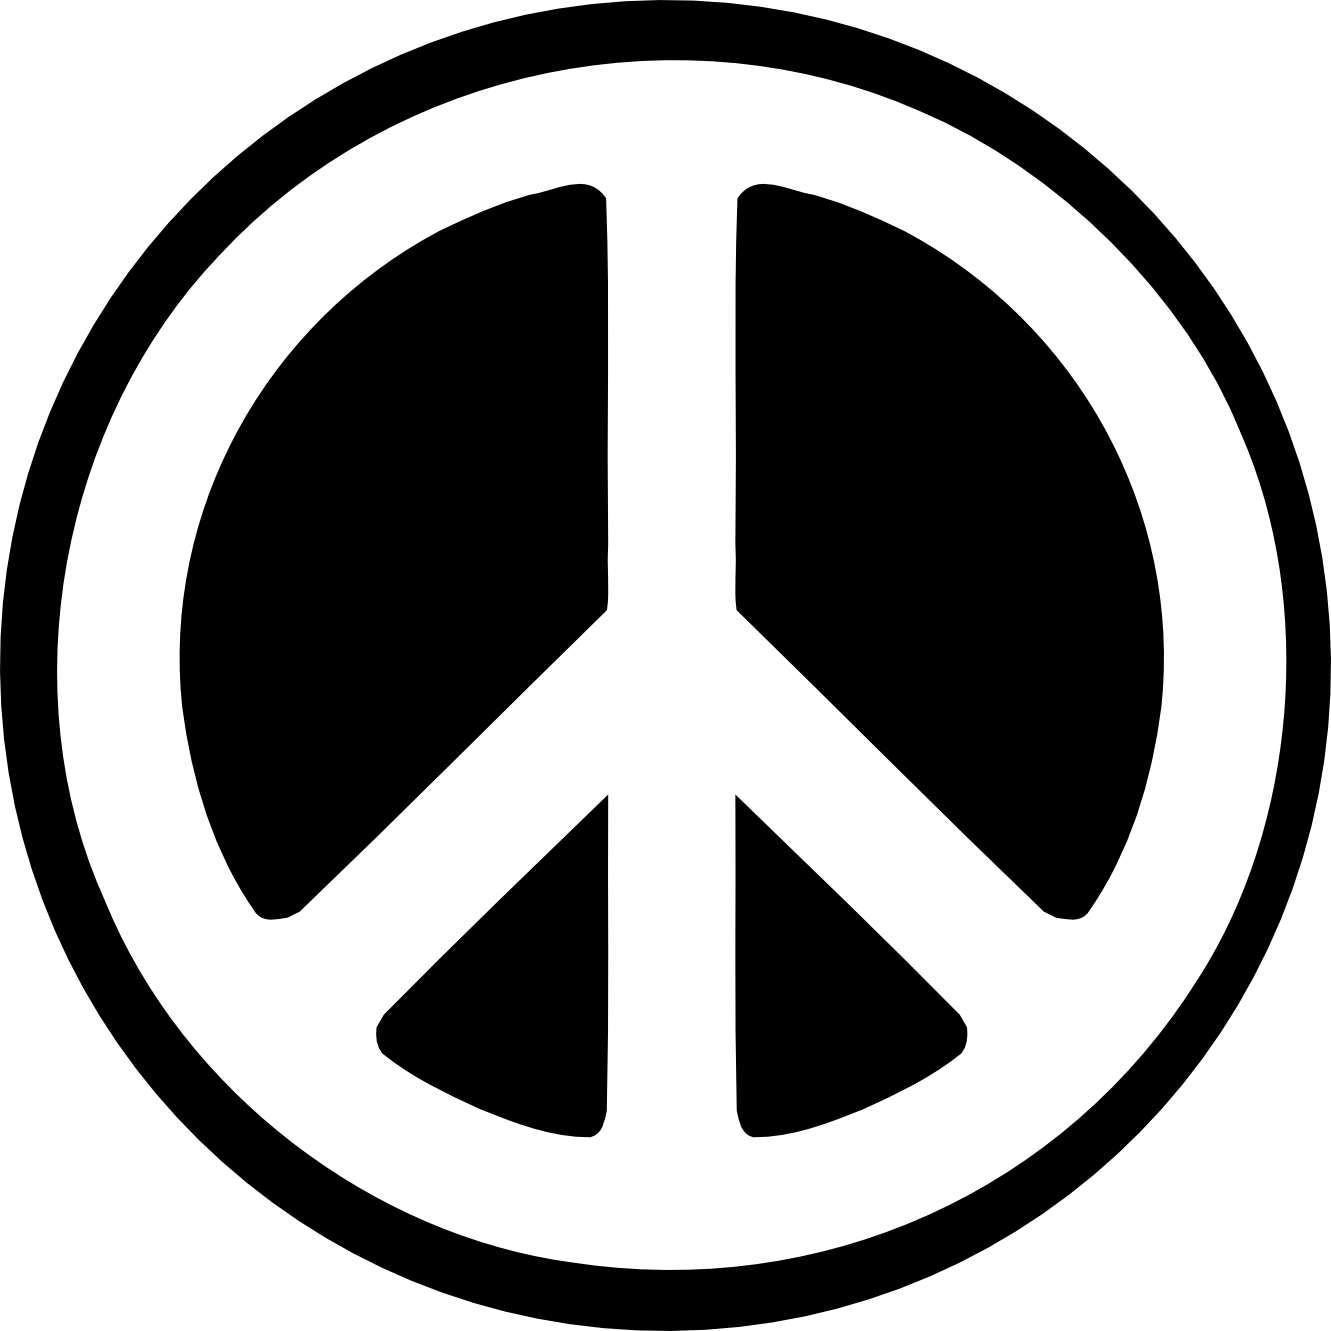 Peace sign clipart no background